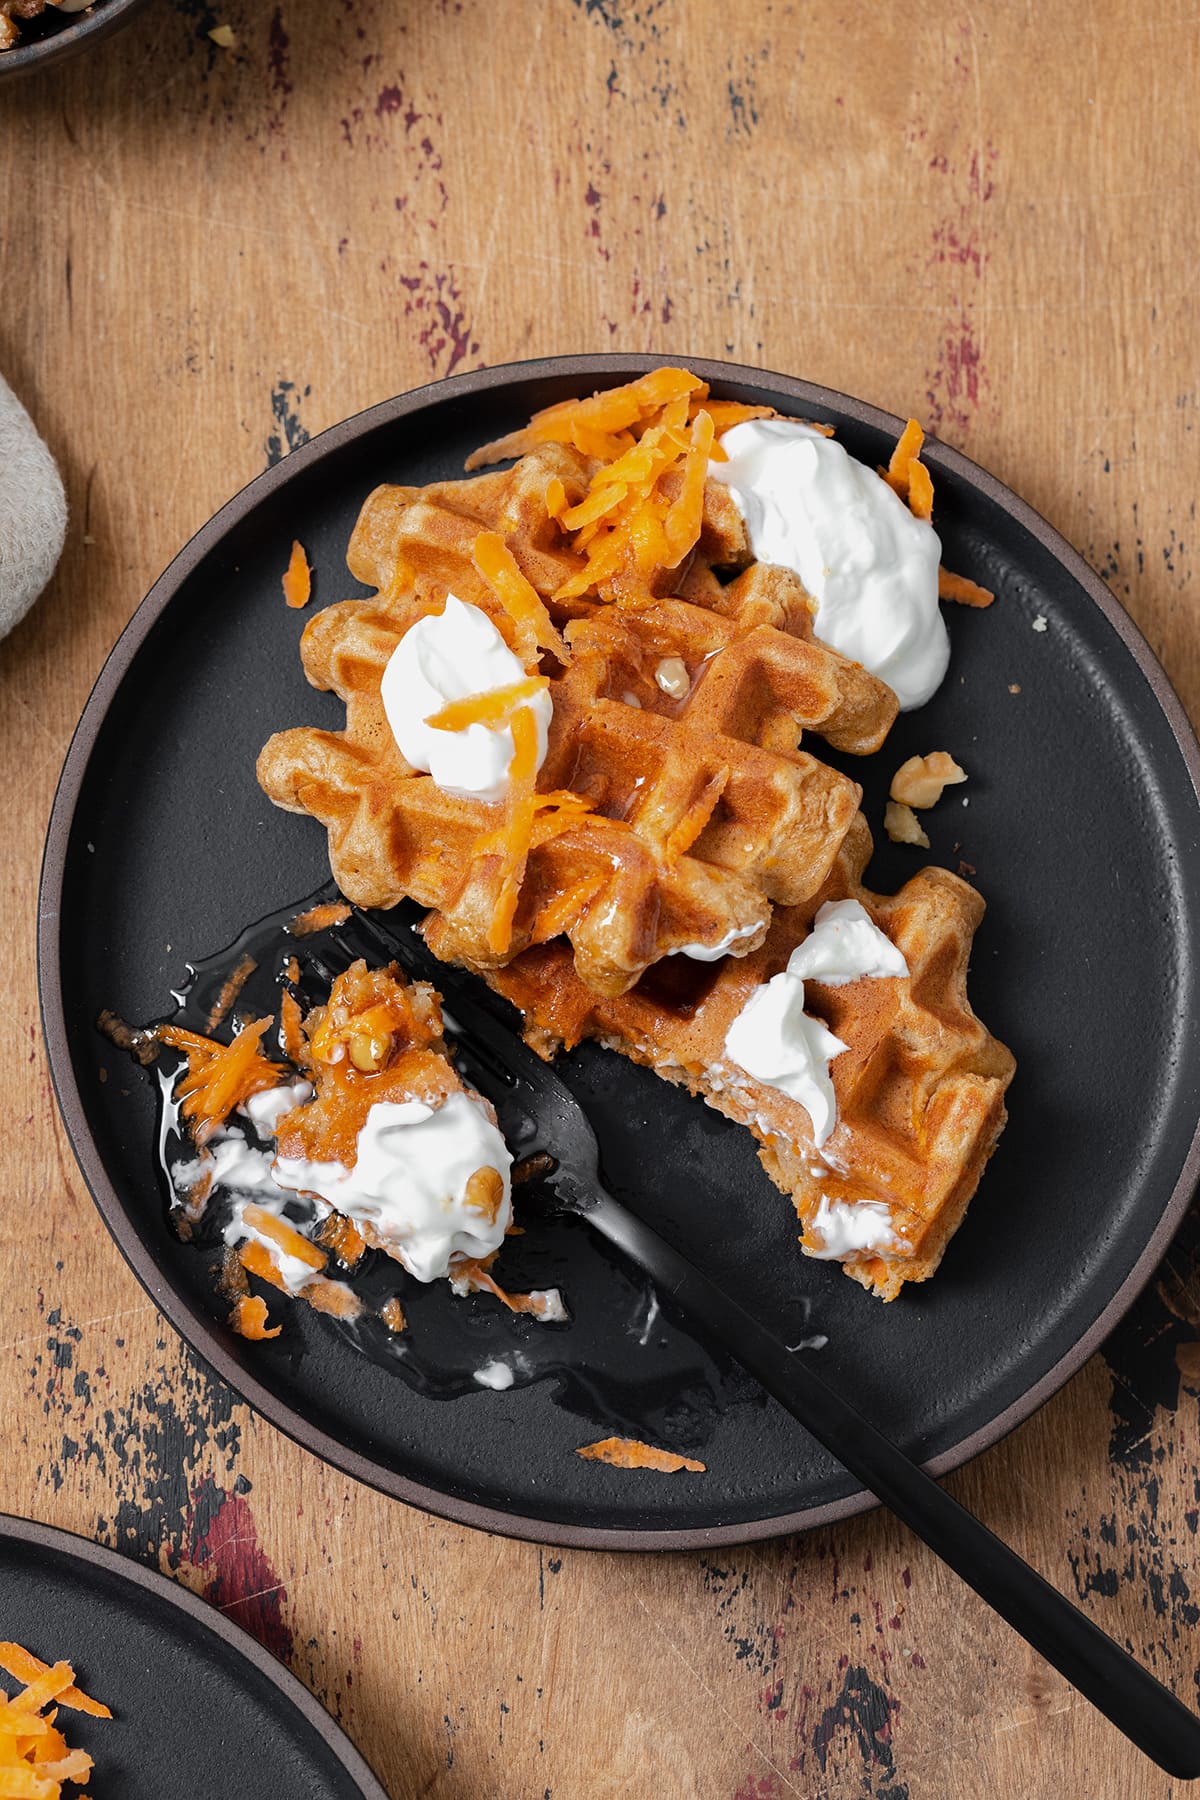 Two carrot cake waffles shown on a black plate topped with greek yogurt, honey, grated carrots, and walnuts. A black fork cut a bite-sized piece from one waffle.